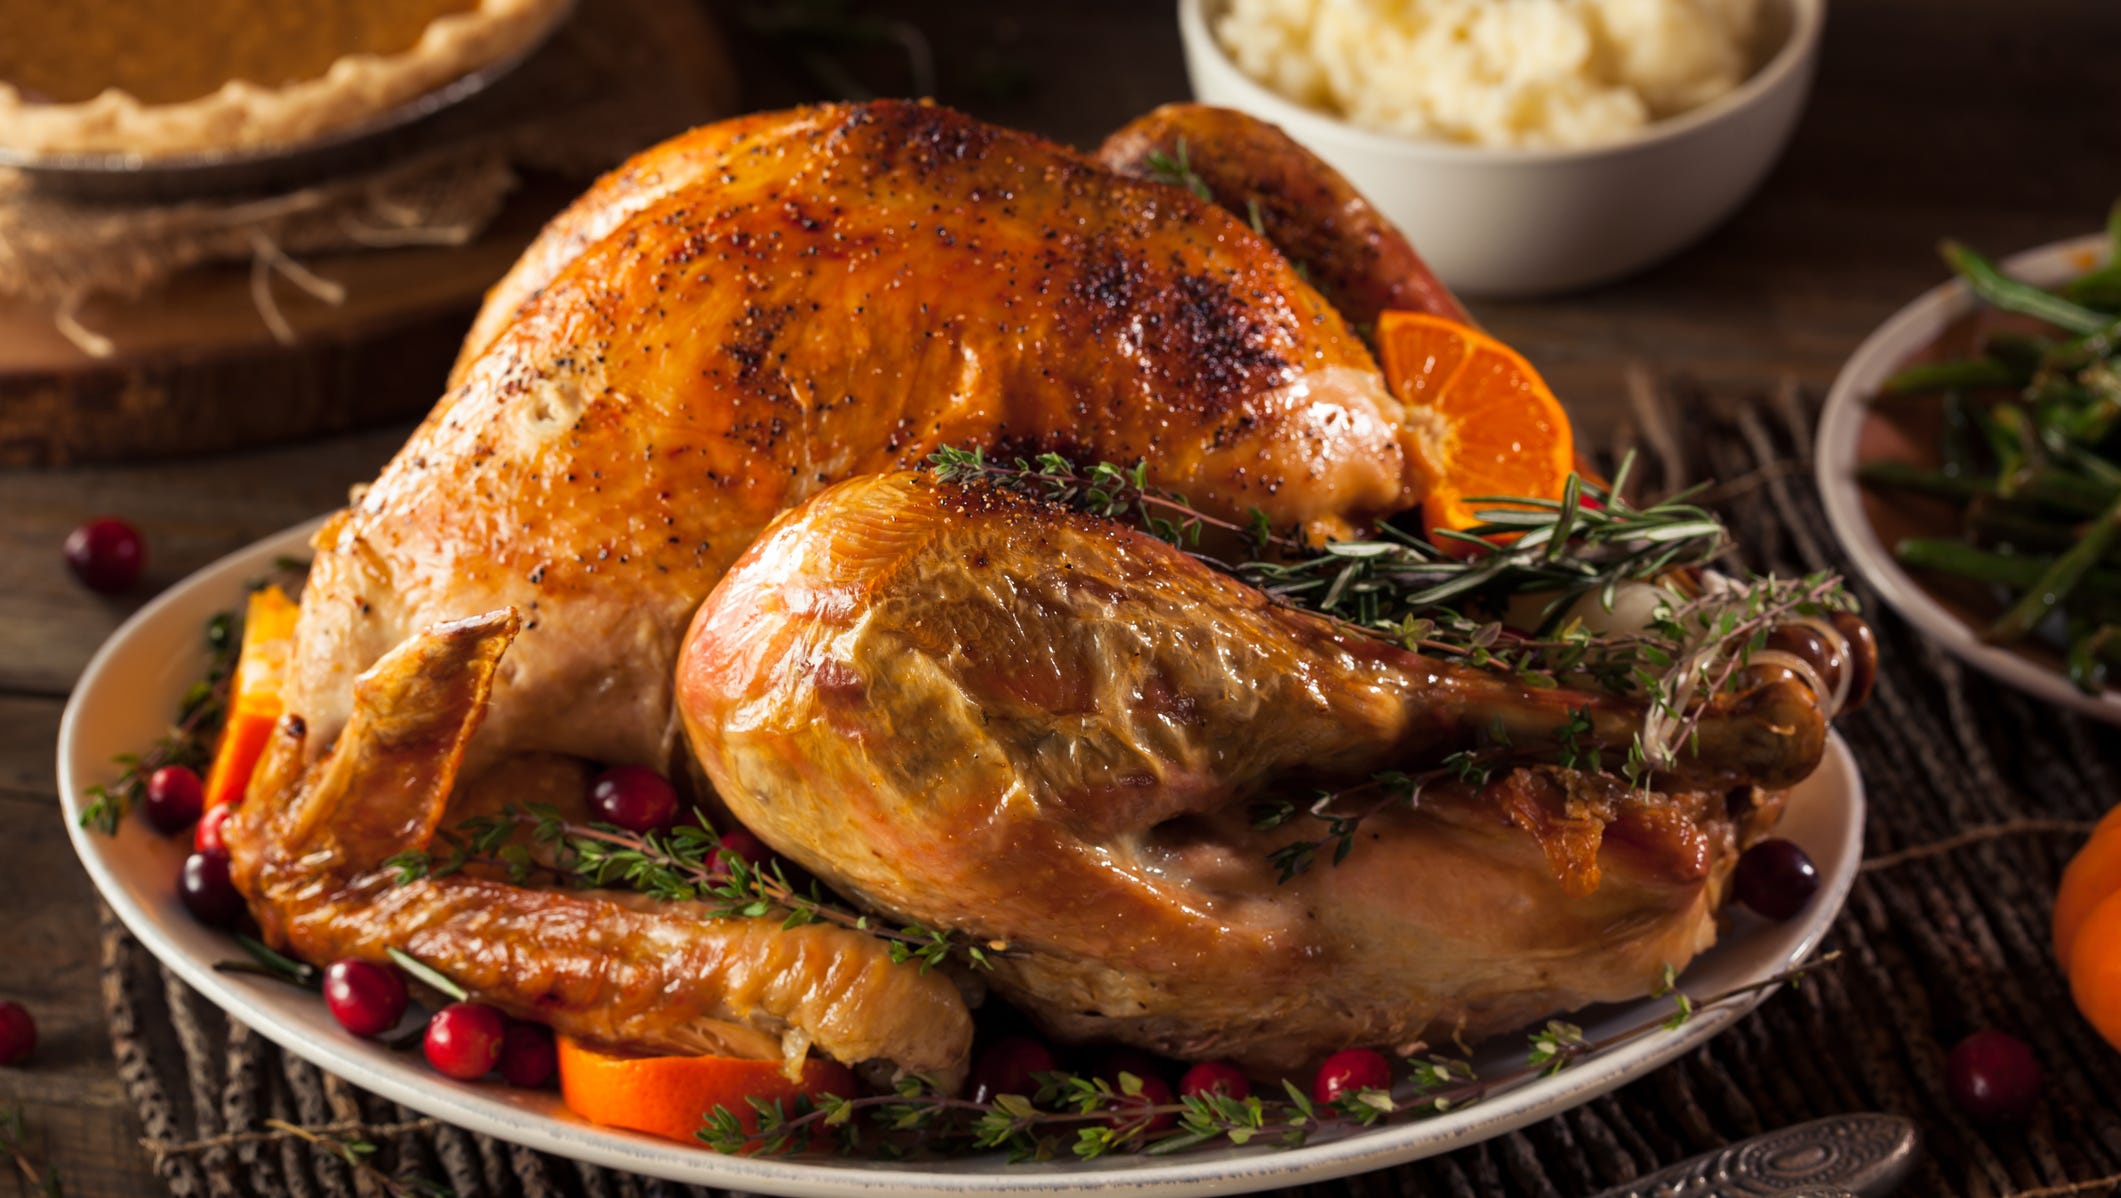 Test Kitchen tips for cooking a whole turkey